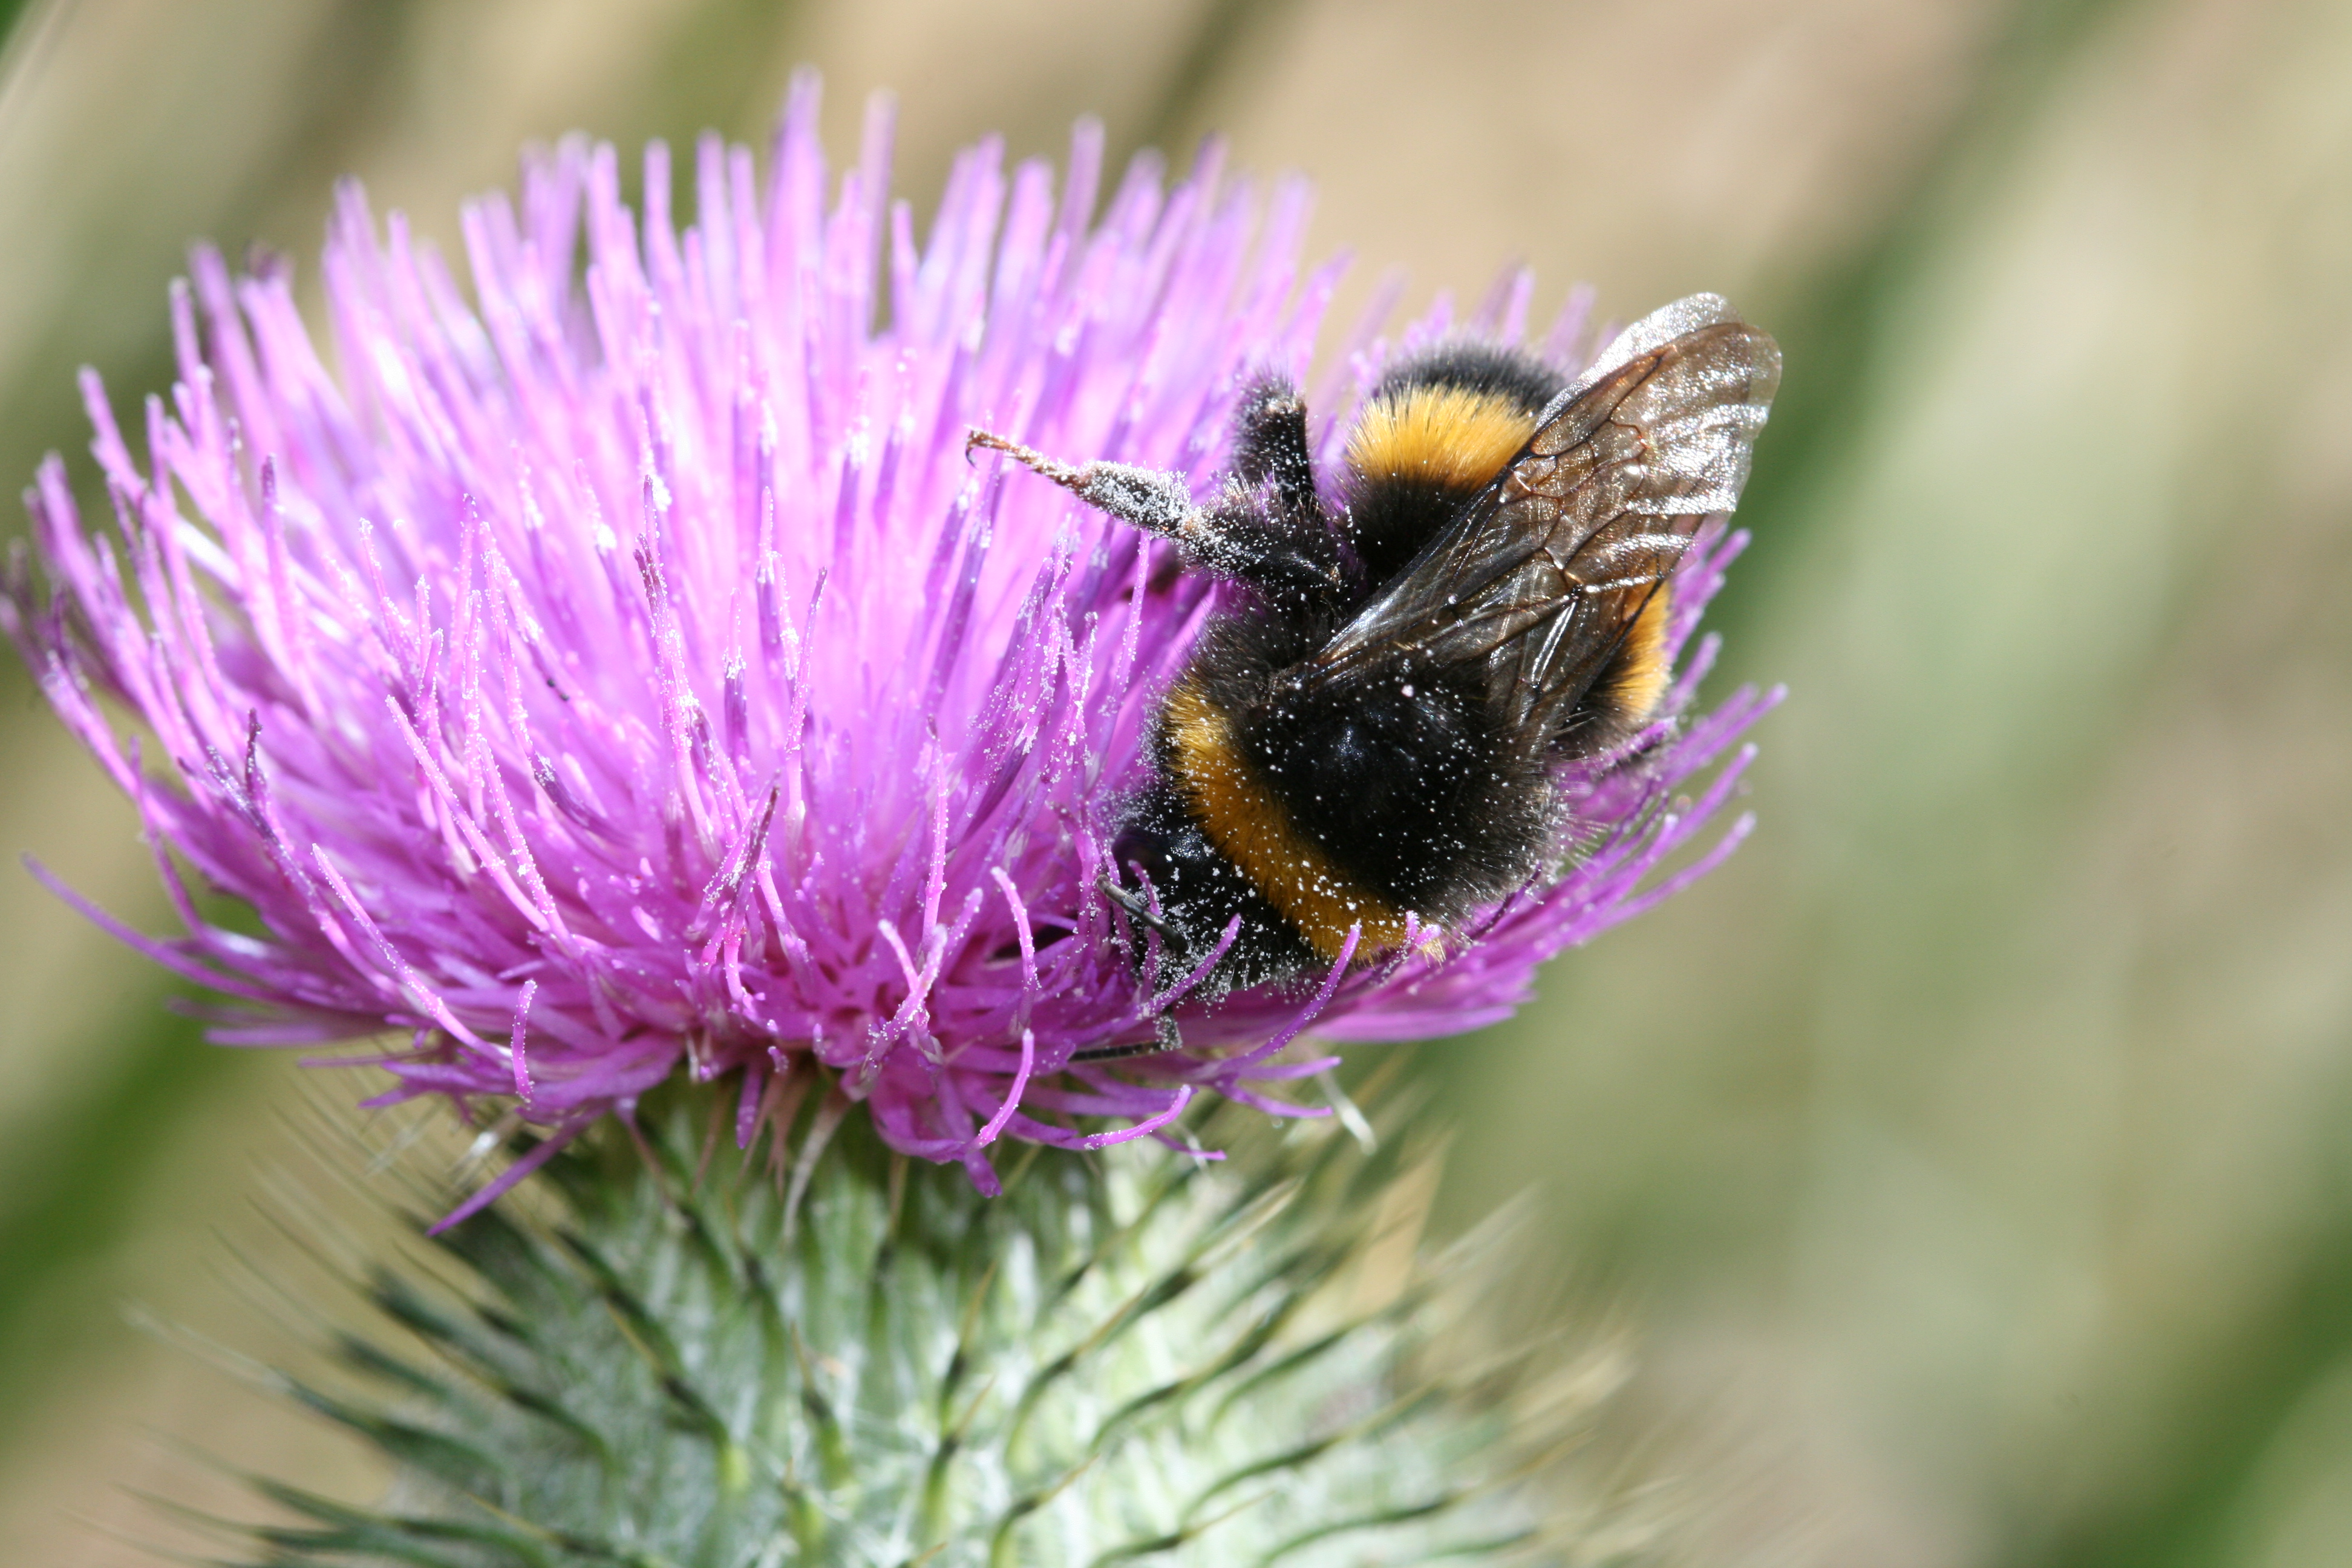 A pest on a weed: Bumble bee on a thistle in Tasmania.